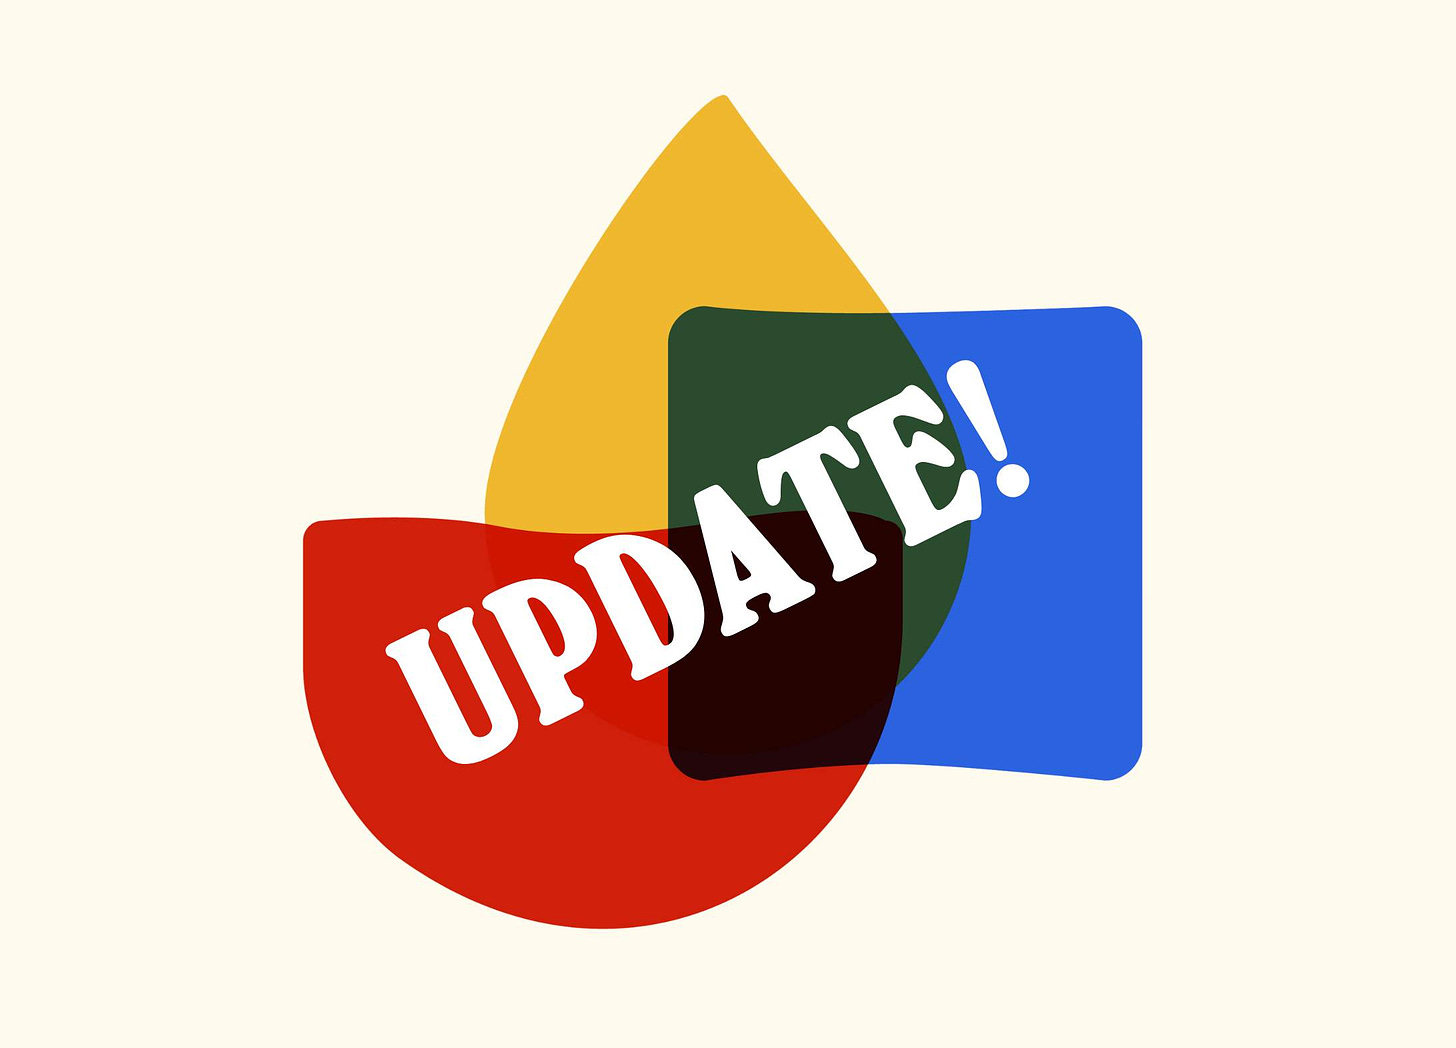 Red, yellow, and blue dumpling shapes on a cream background with the text "update!"